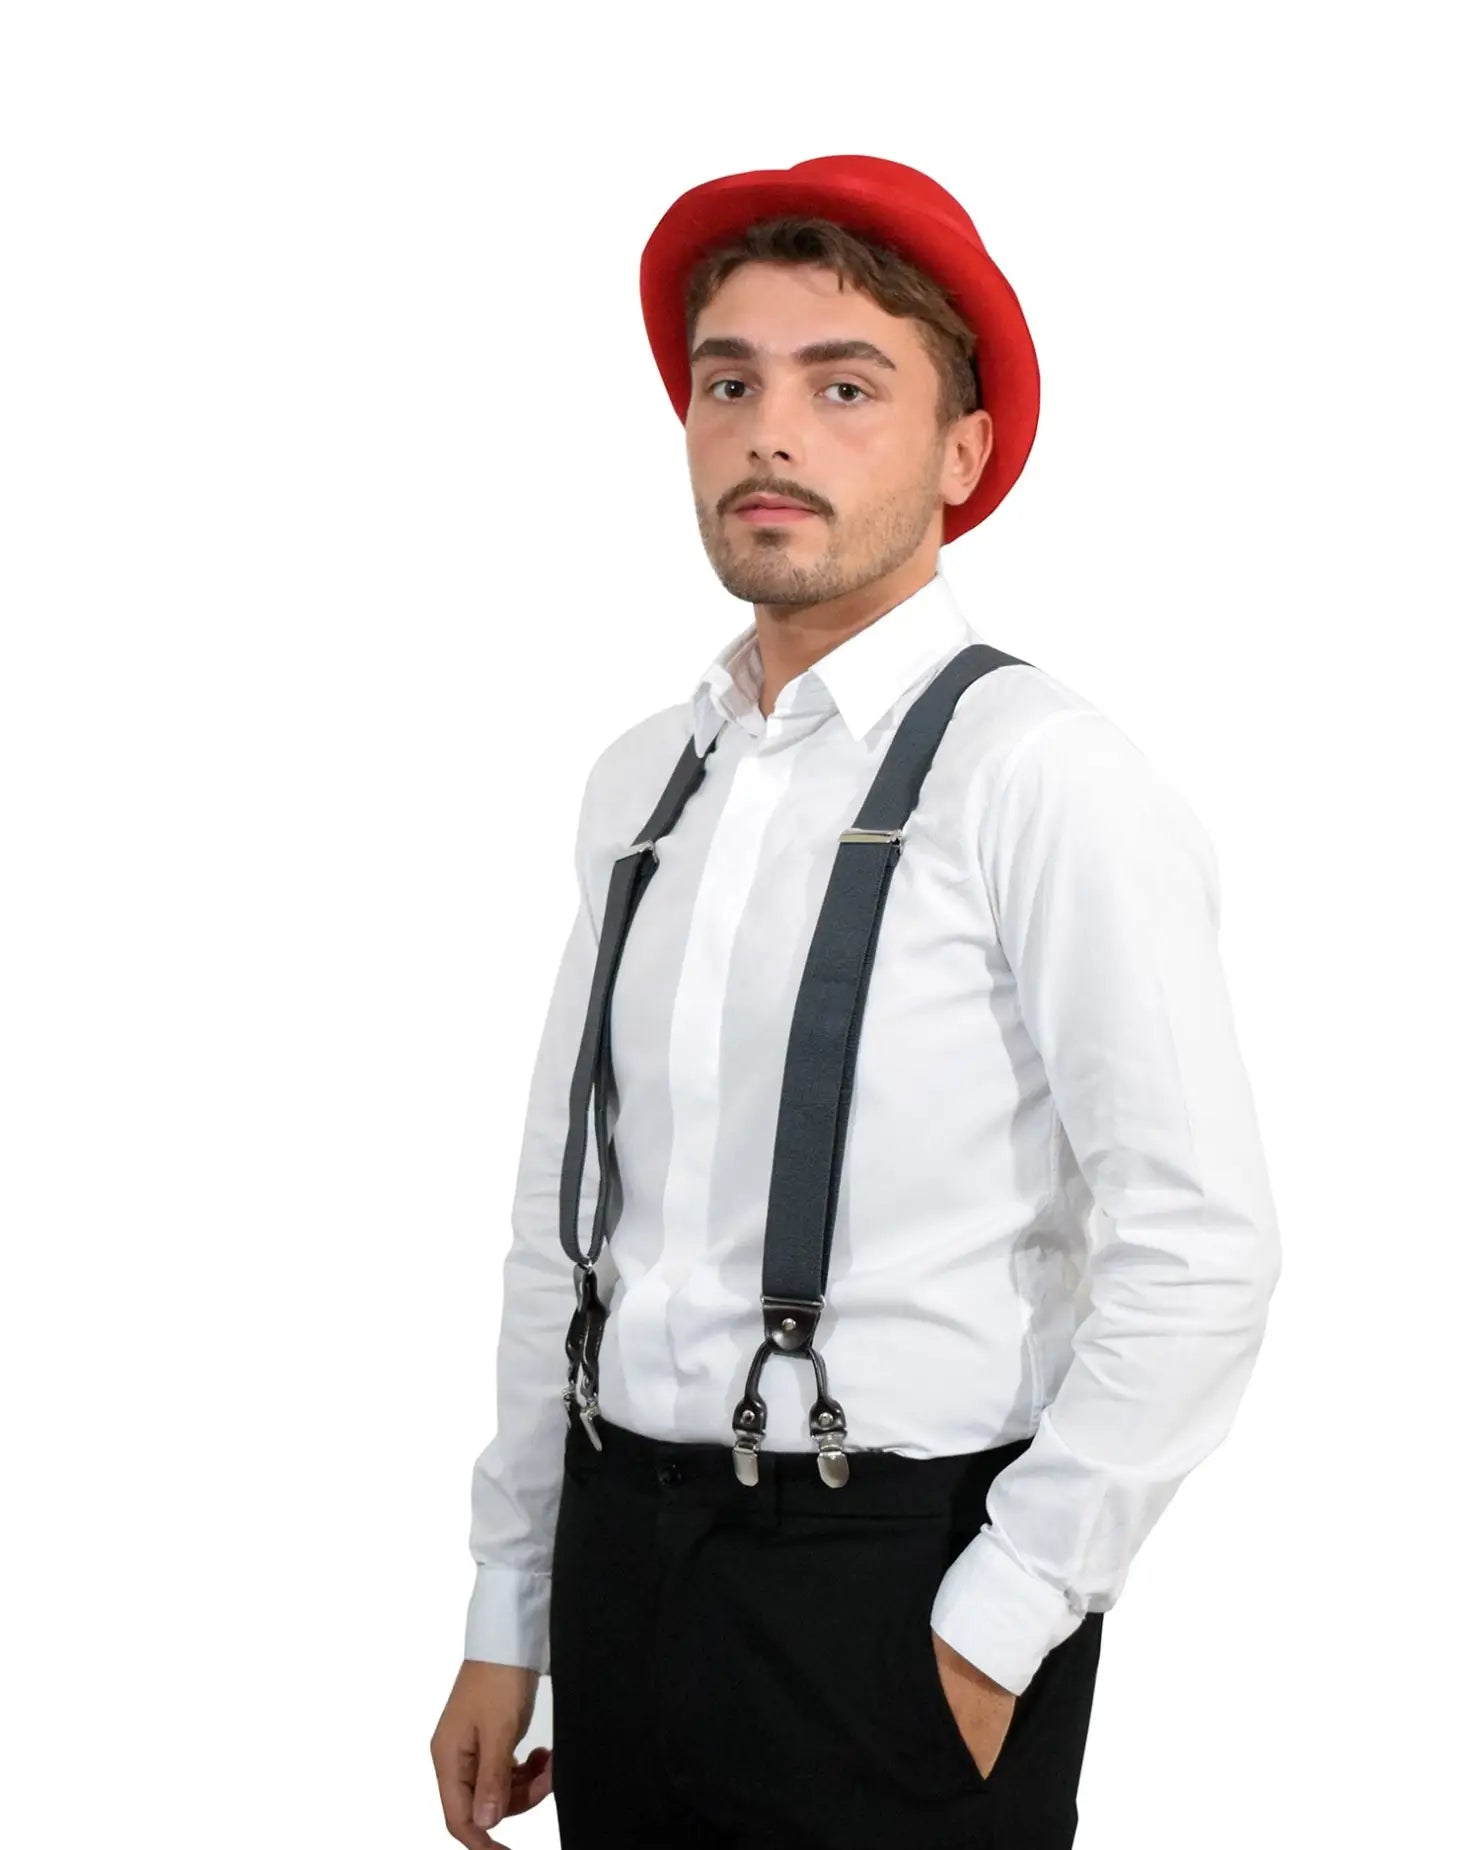 Unisex person wearing a classic white shirt and suspender with bowler wool felt hat